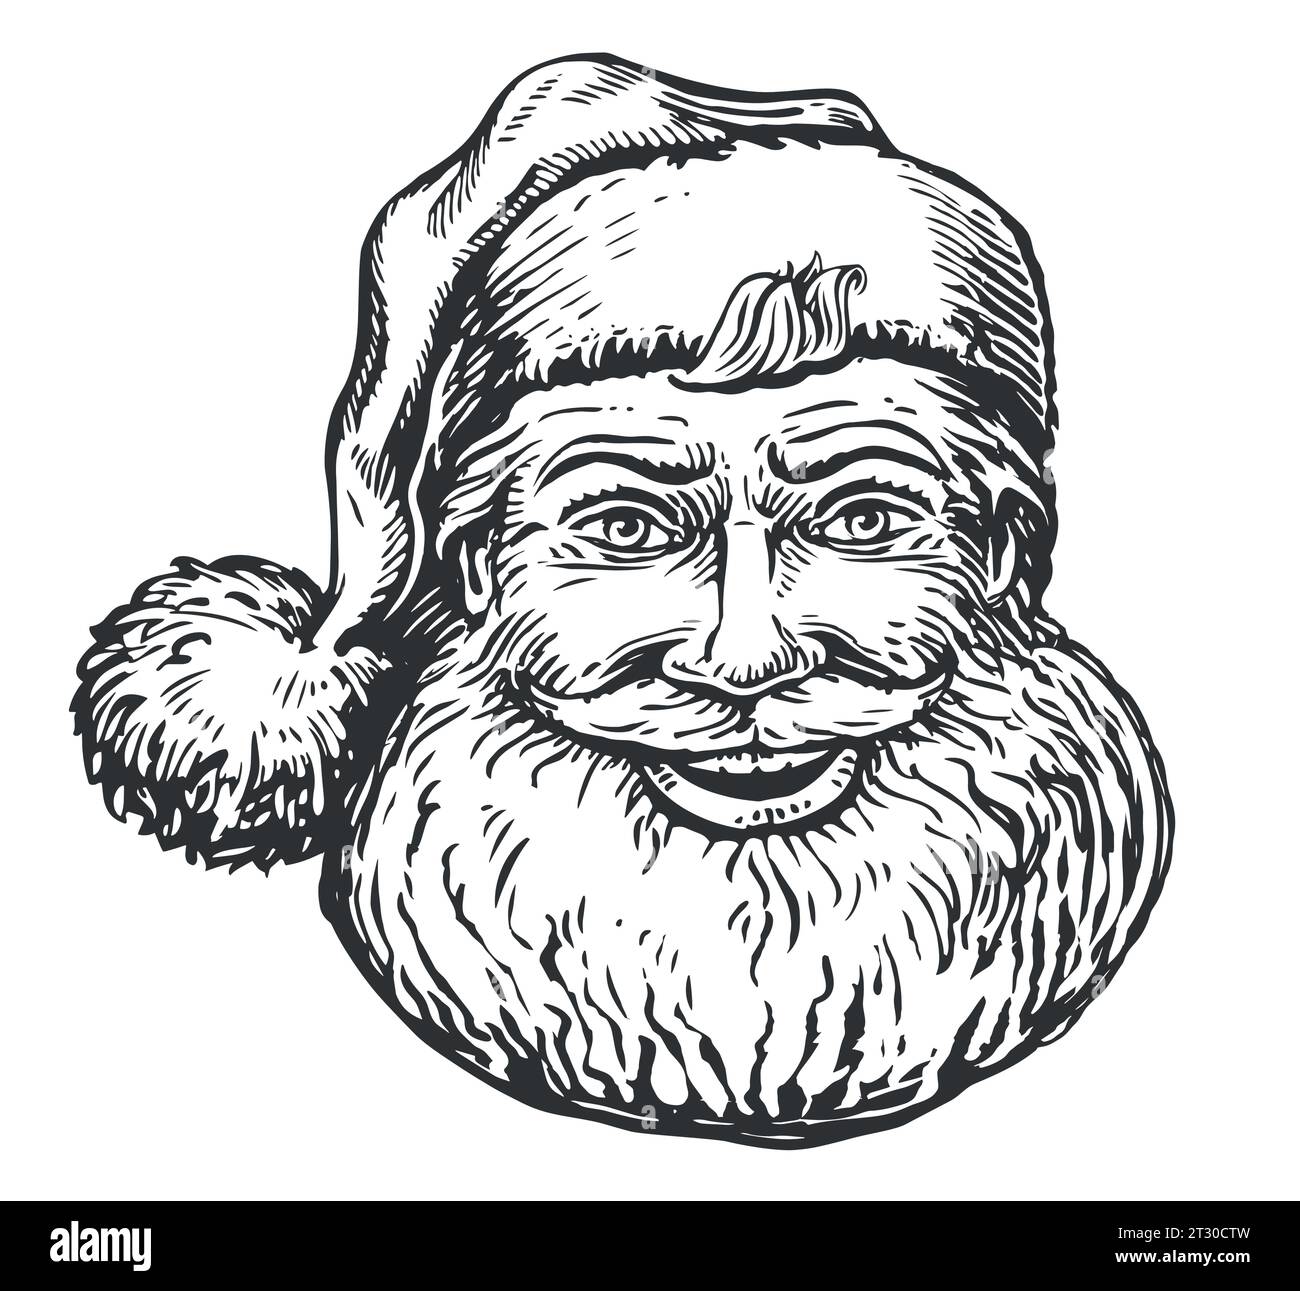 Smiling cute Santa Claus in hat hand drawn in sketchy style. Christmas symbol vintage vector illustration Stock Vector